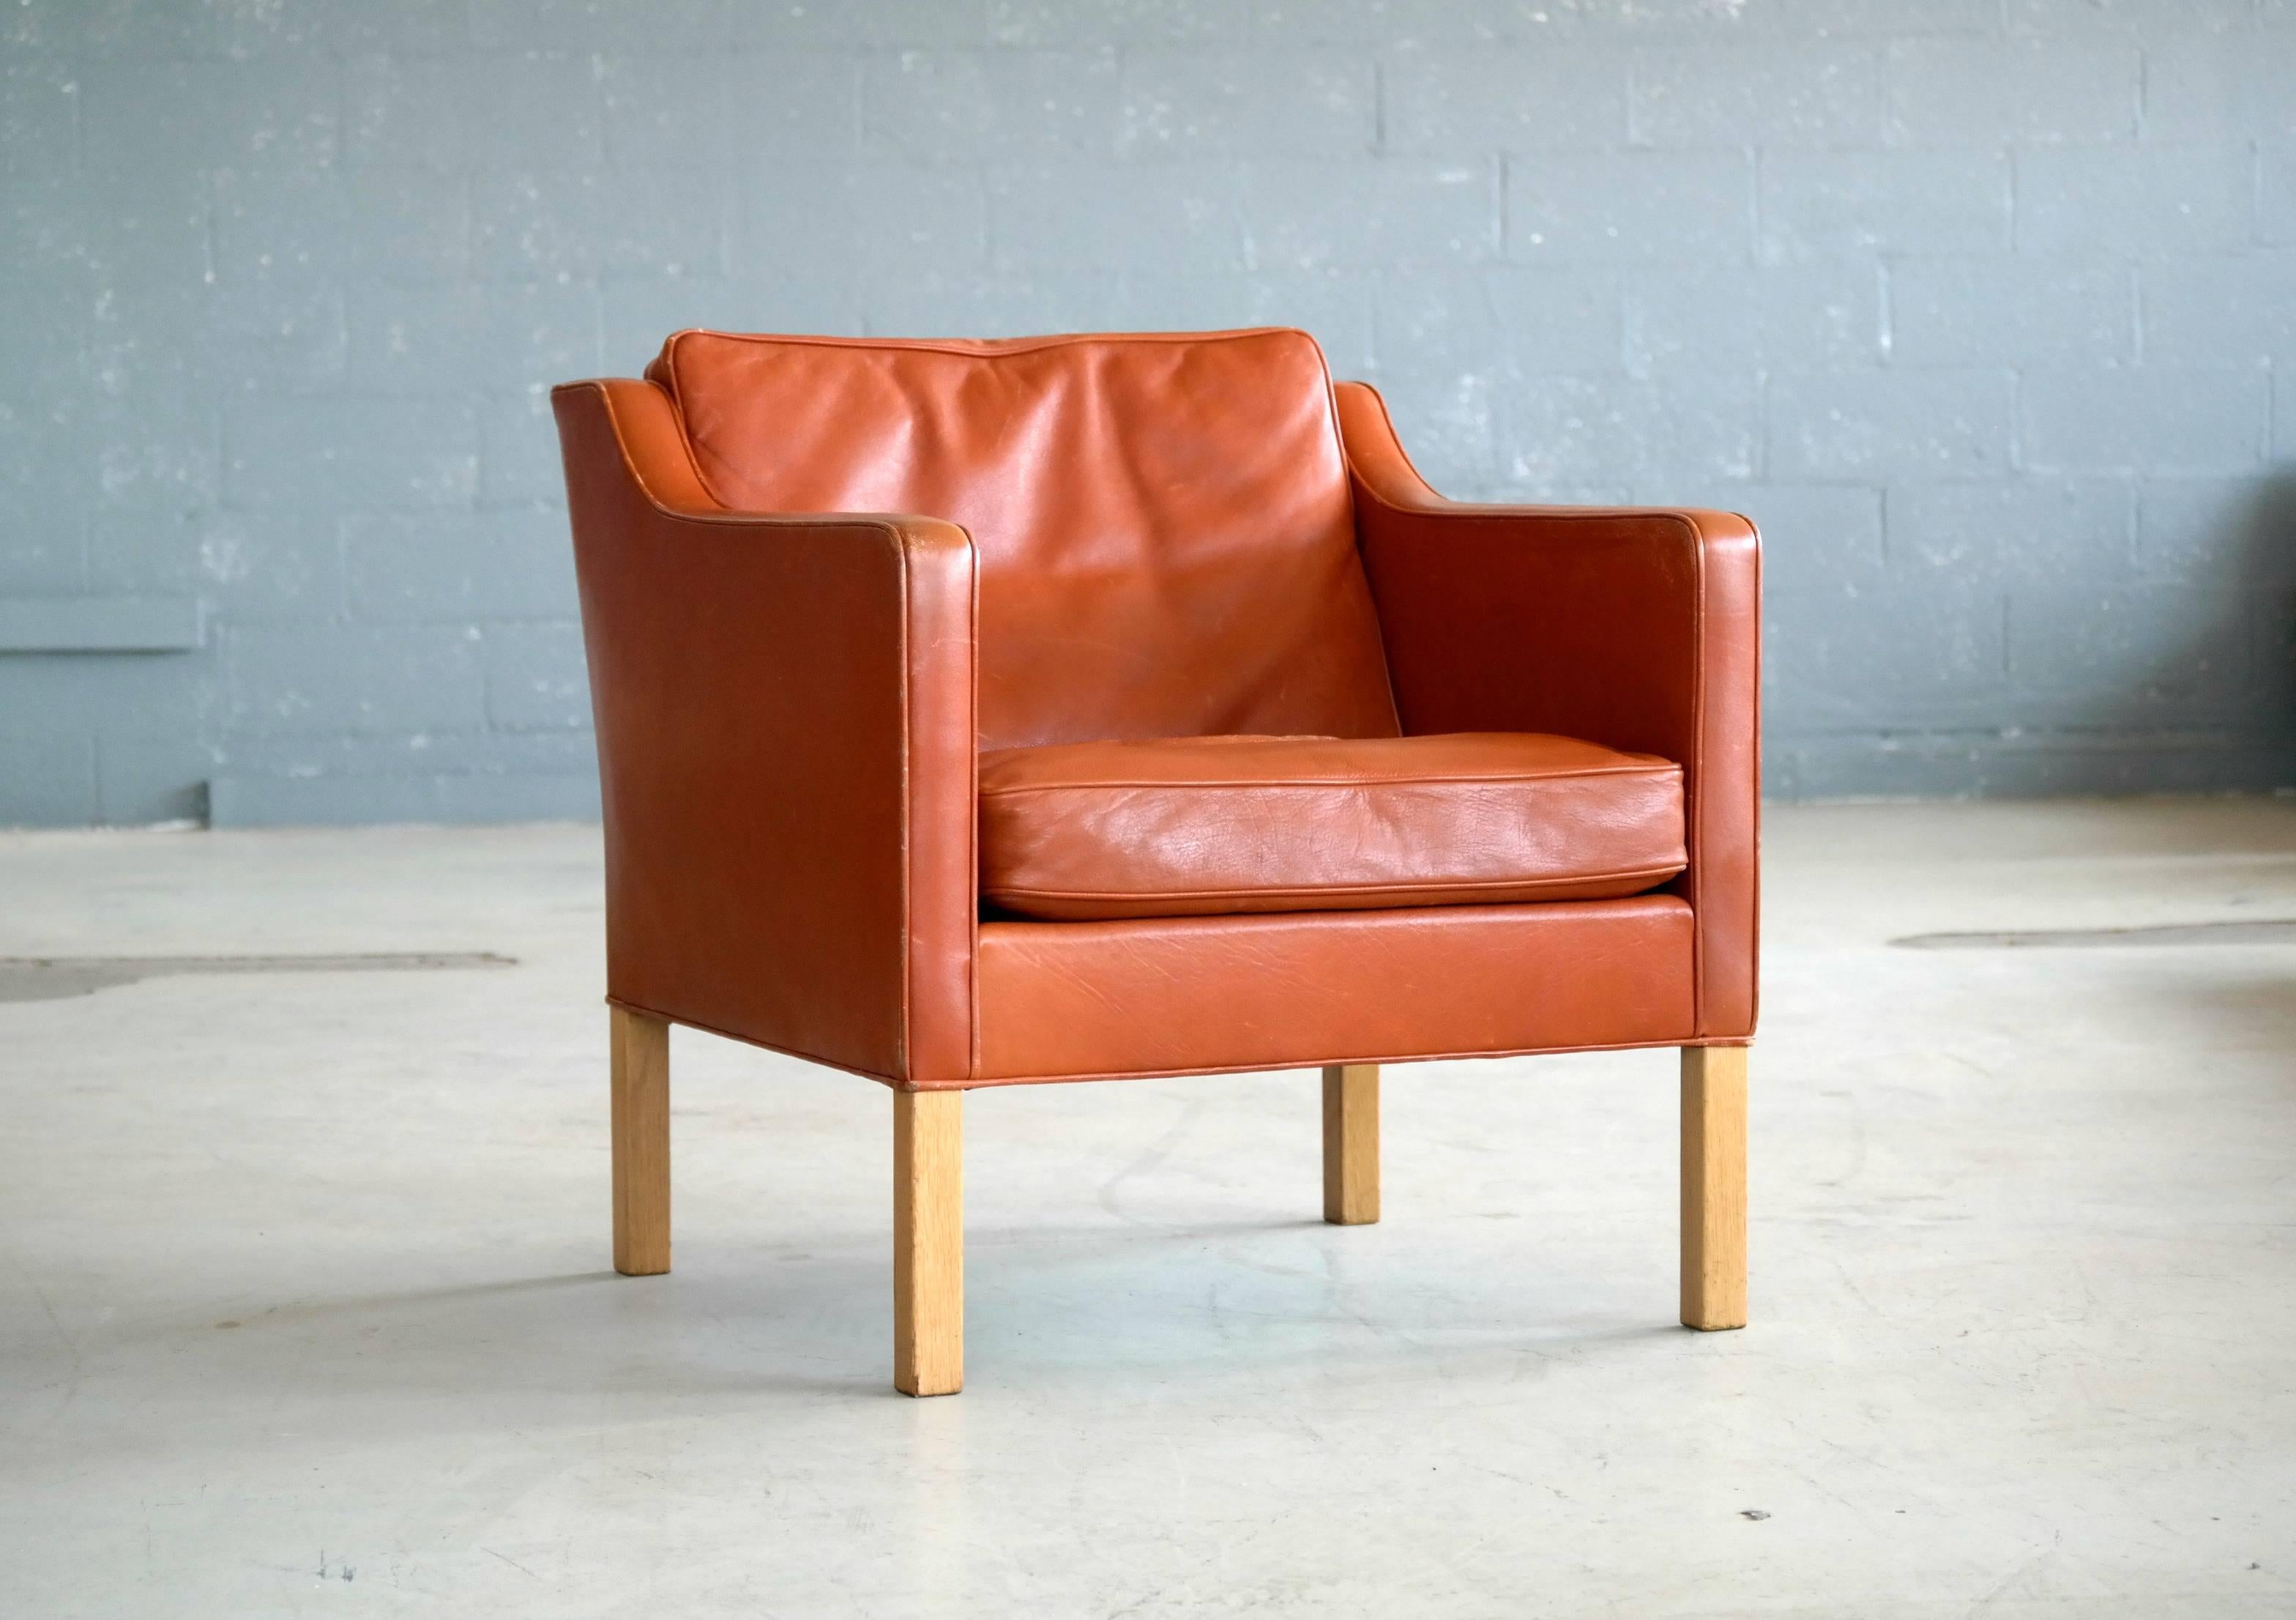 Stunning Børge Mogensen designed lounge chair model 2421 for Fredericia. One of the most elegant Classic midcentury Danish lounge chairs ever made of a design that will just never go out of style. Supple cognac colored leather with down-filled